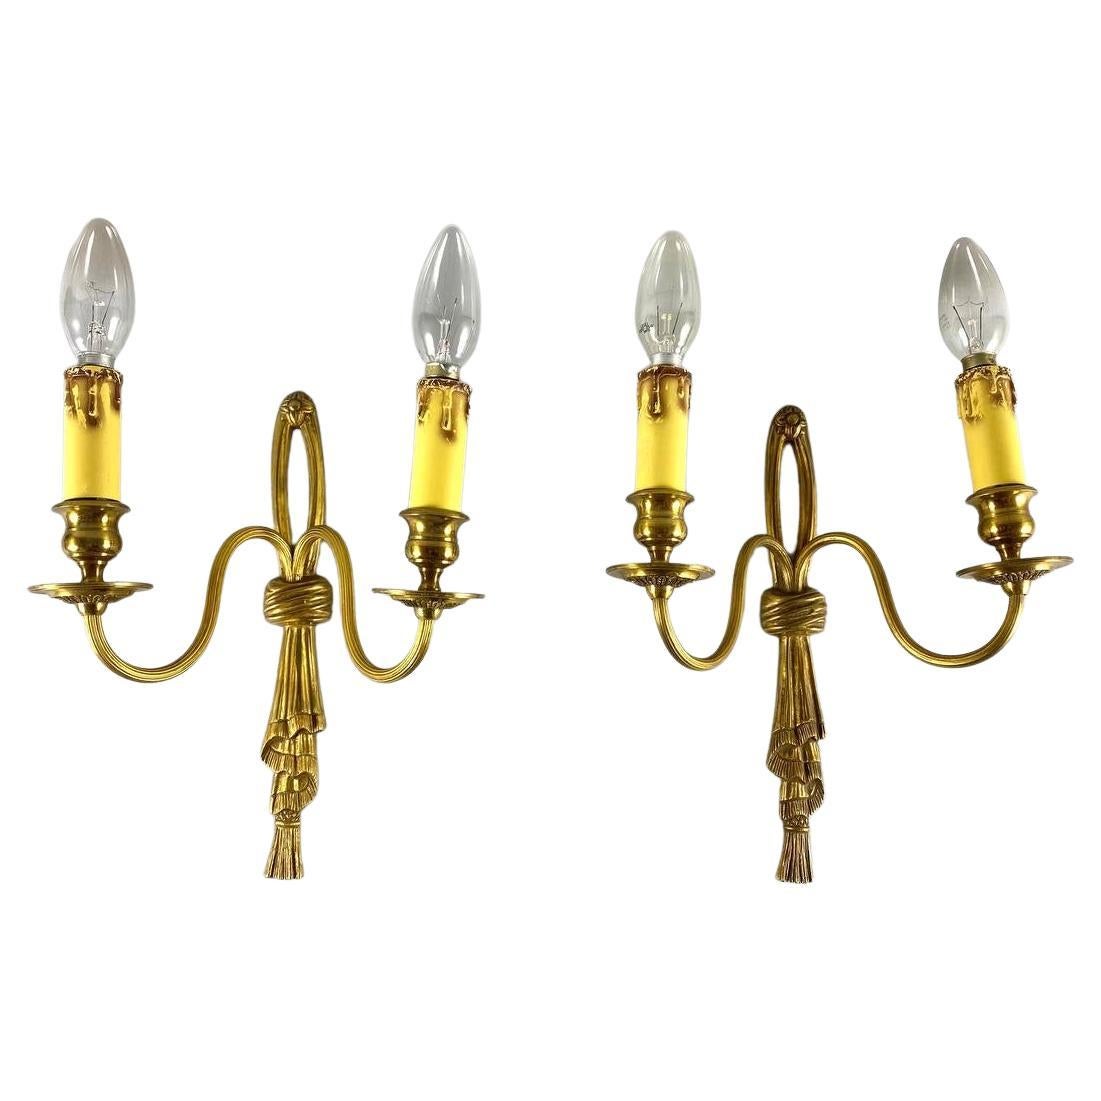 Exquisite Vintage Bronze Wall Sconces with Candles, Set of 2 For Sale